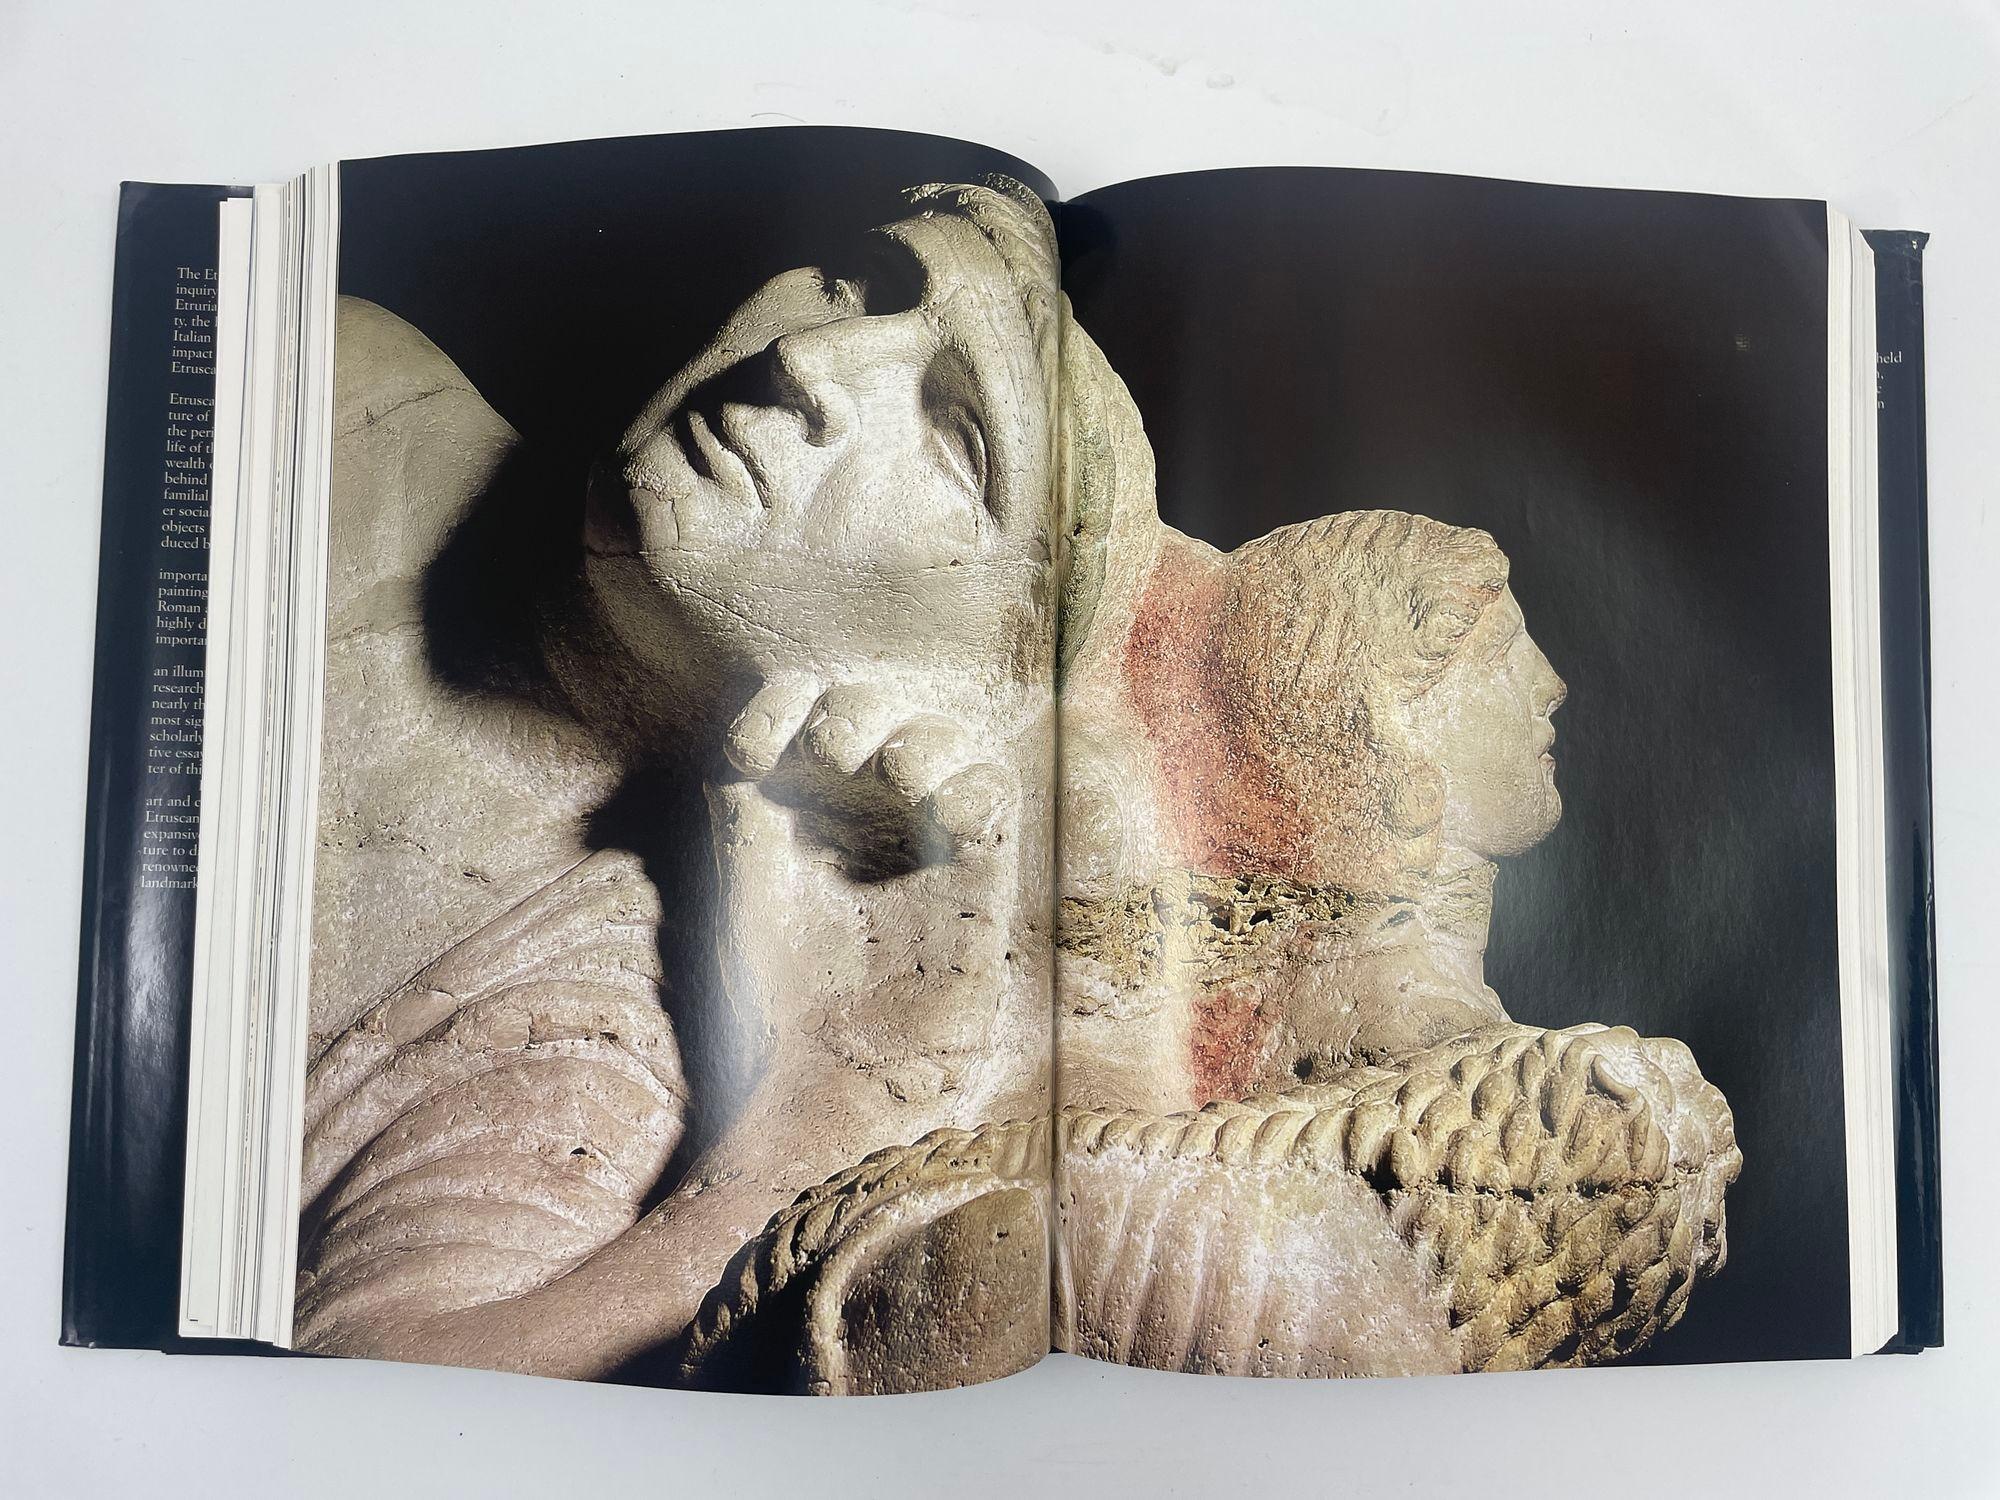 The Etruscans Hardcover Book by Mario Torelli 1st Ed. 2001 Rizzoli For Sale 4